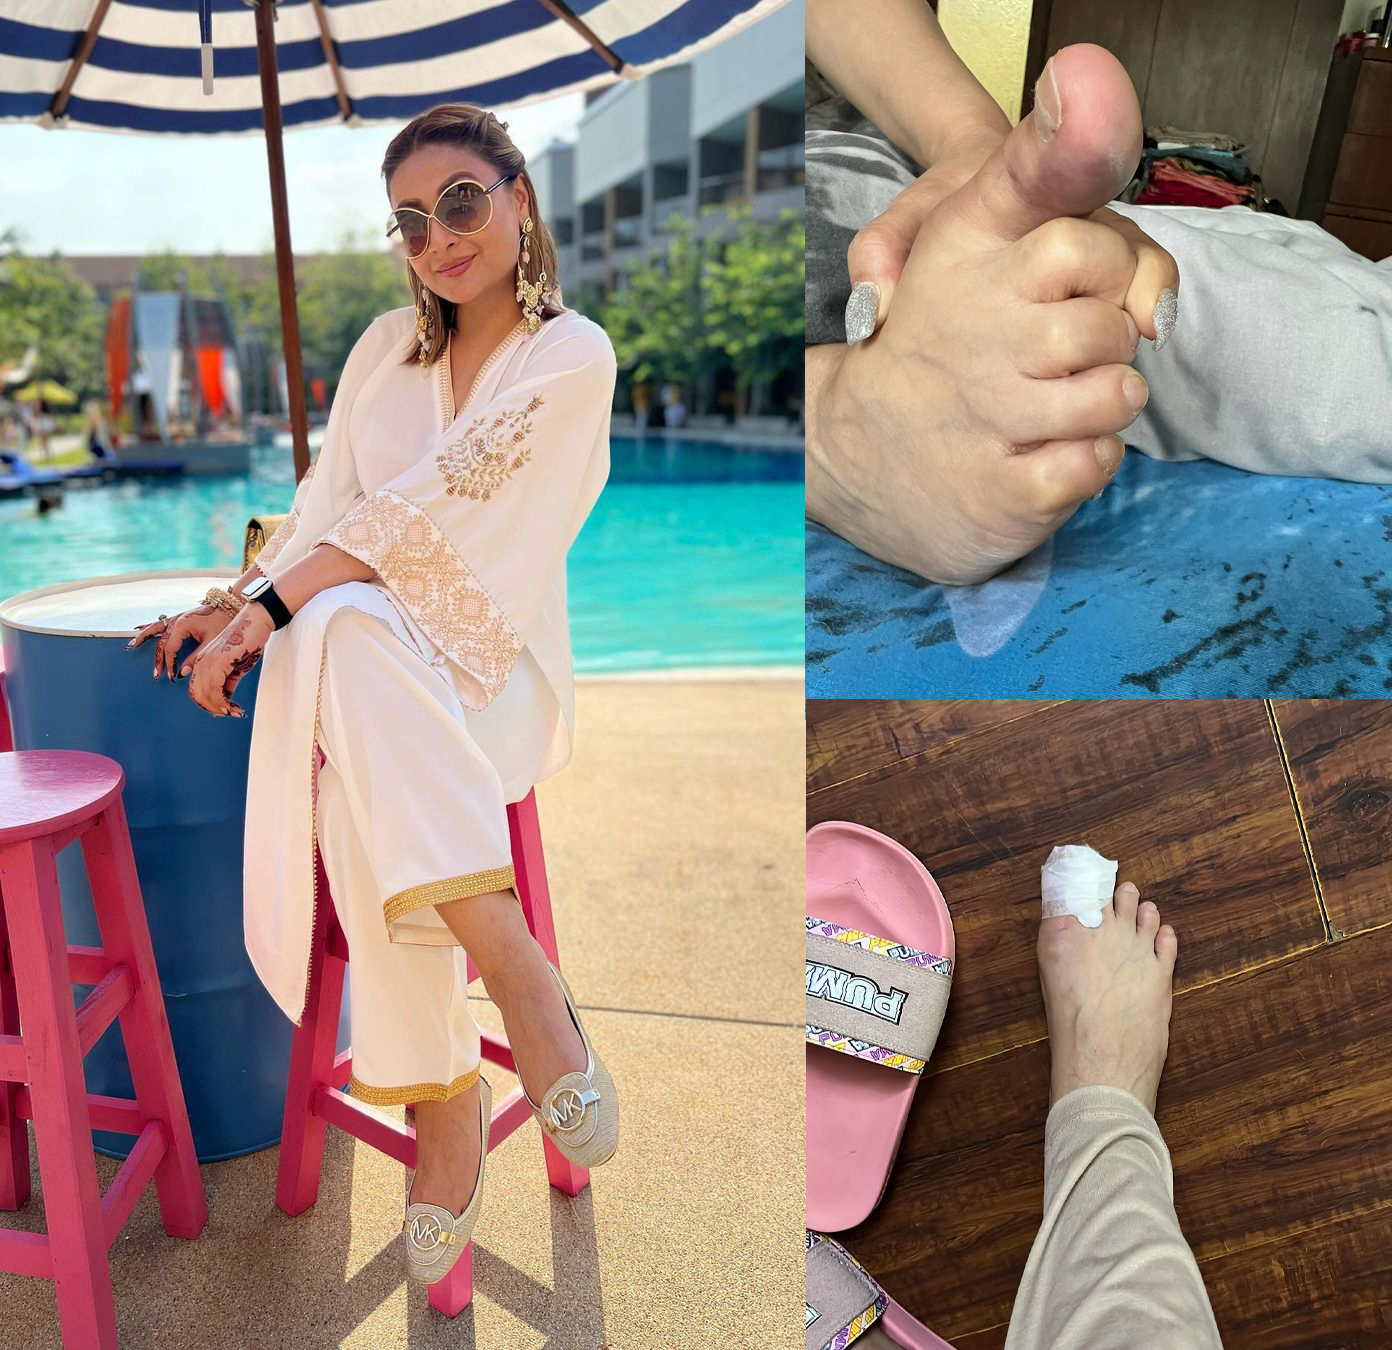 Urvashi Dholakia Recently Got Injury In Her Toe Who Shared The Pictures Of That To Full Stop Who Says Fake 